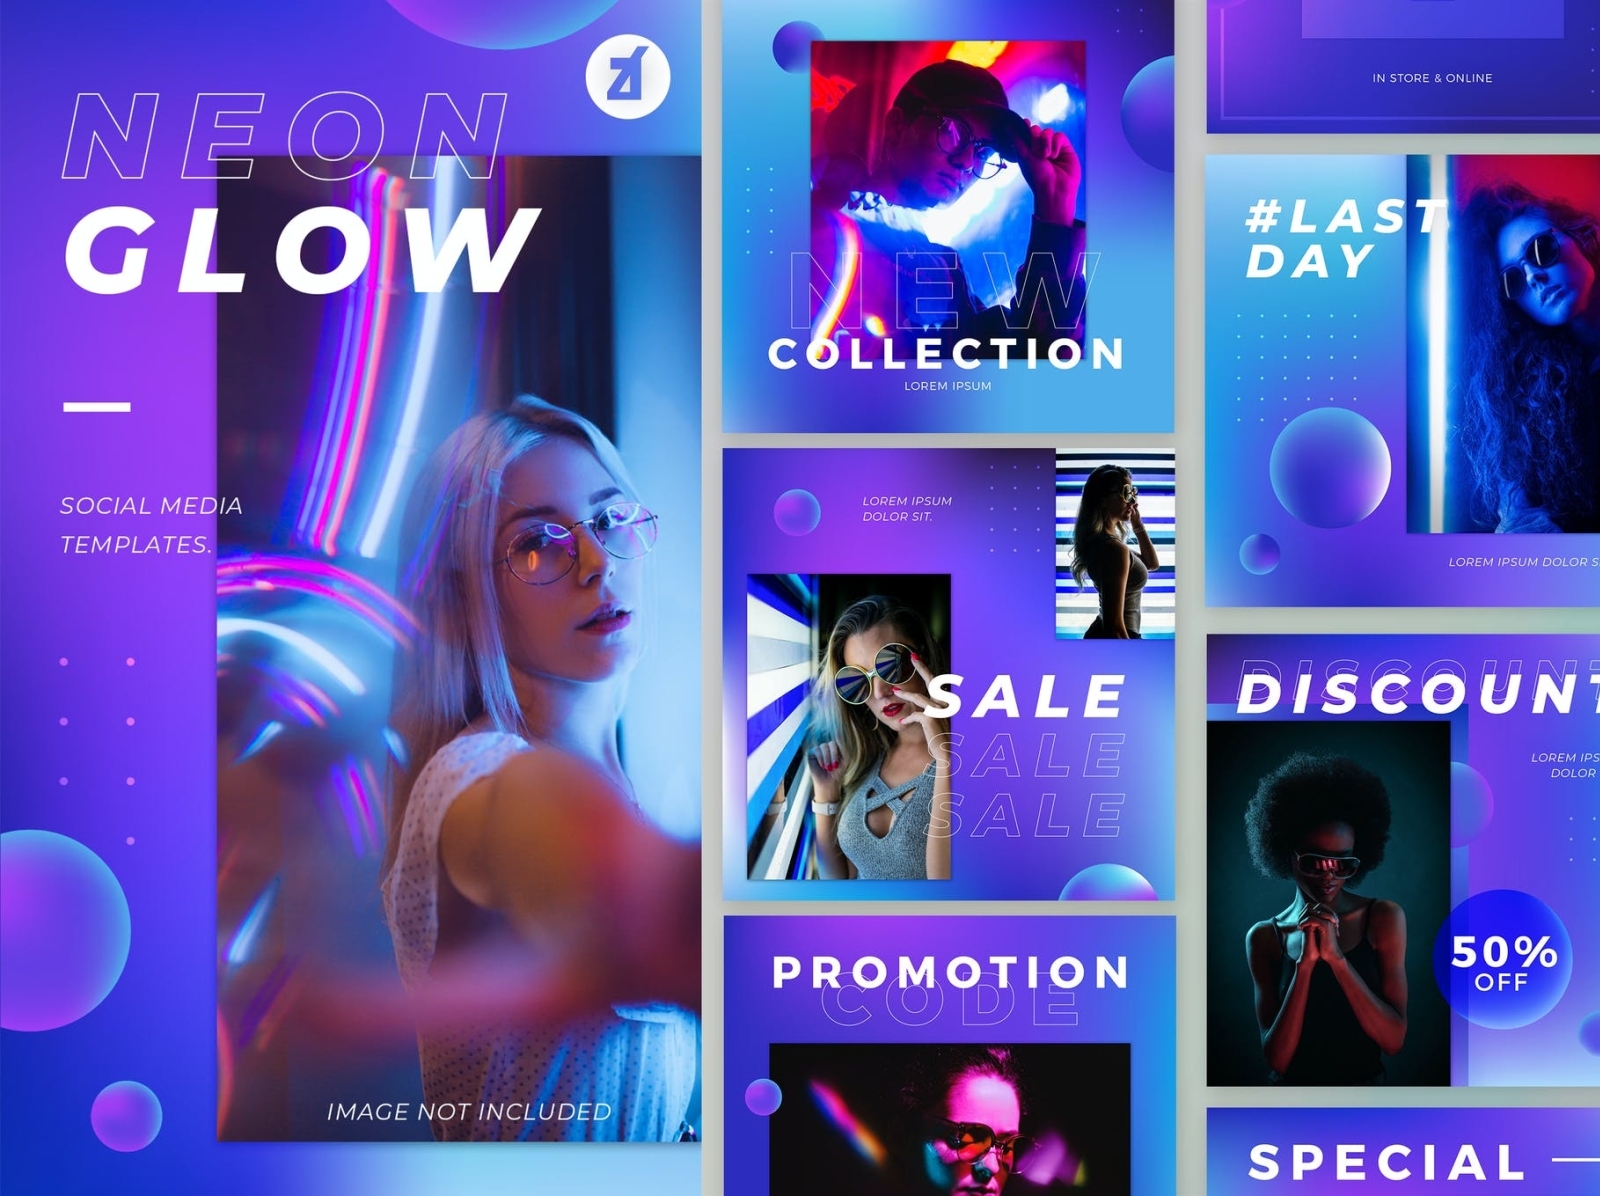 Neon glow social media graphic templates by Resume/CV on Dribbble